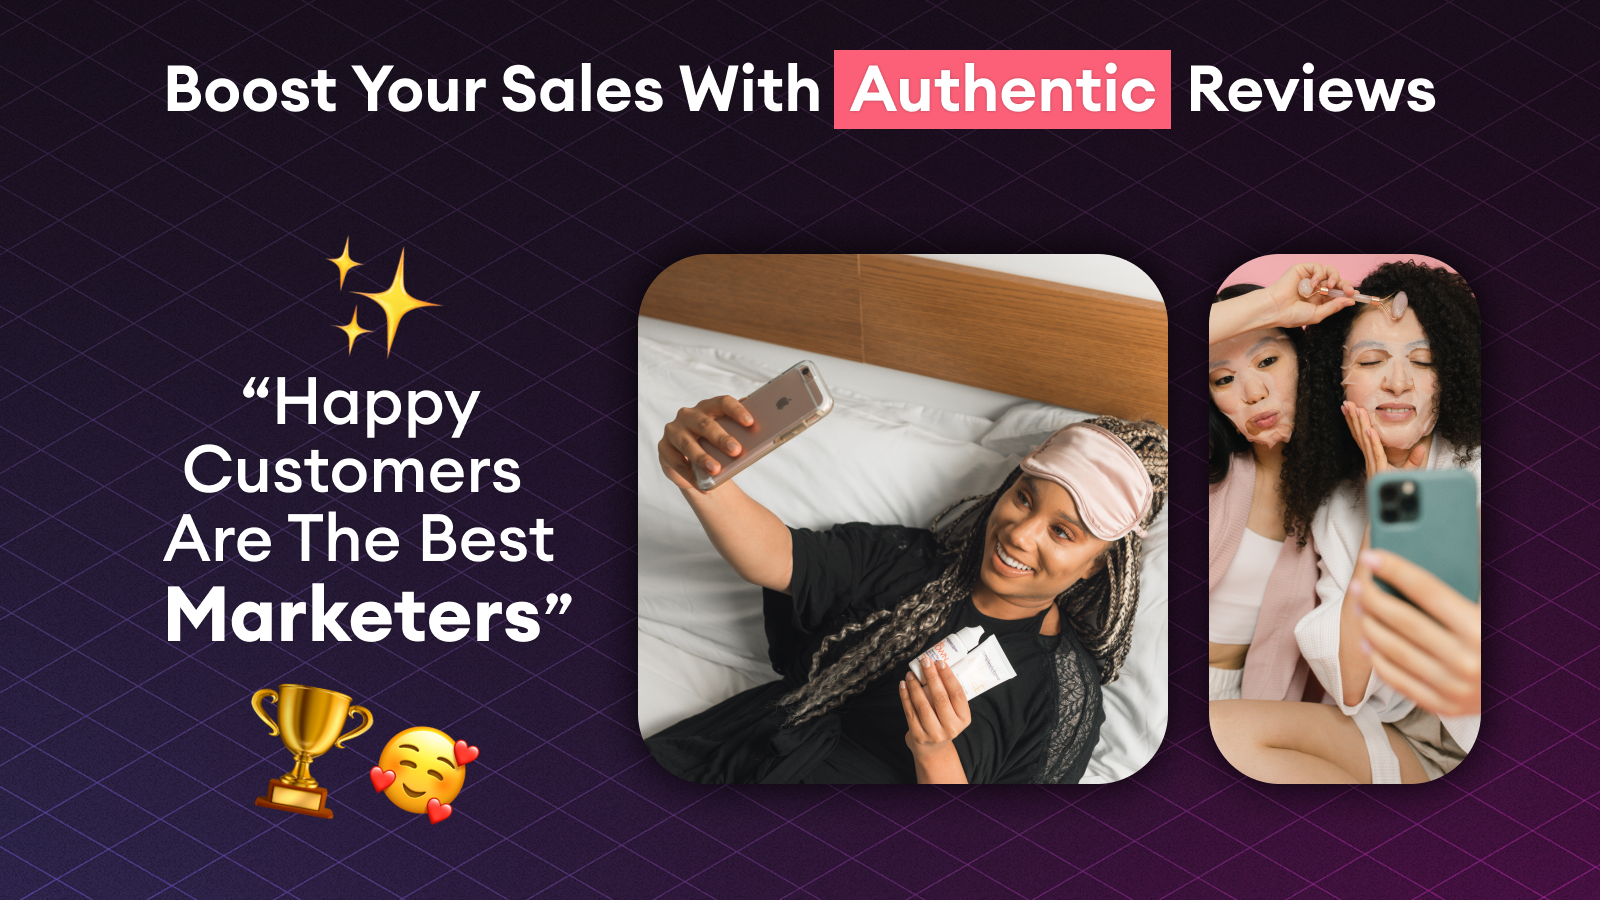 Boost your sales with authentic reviews